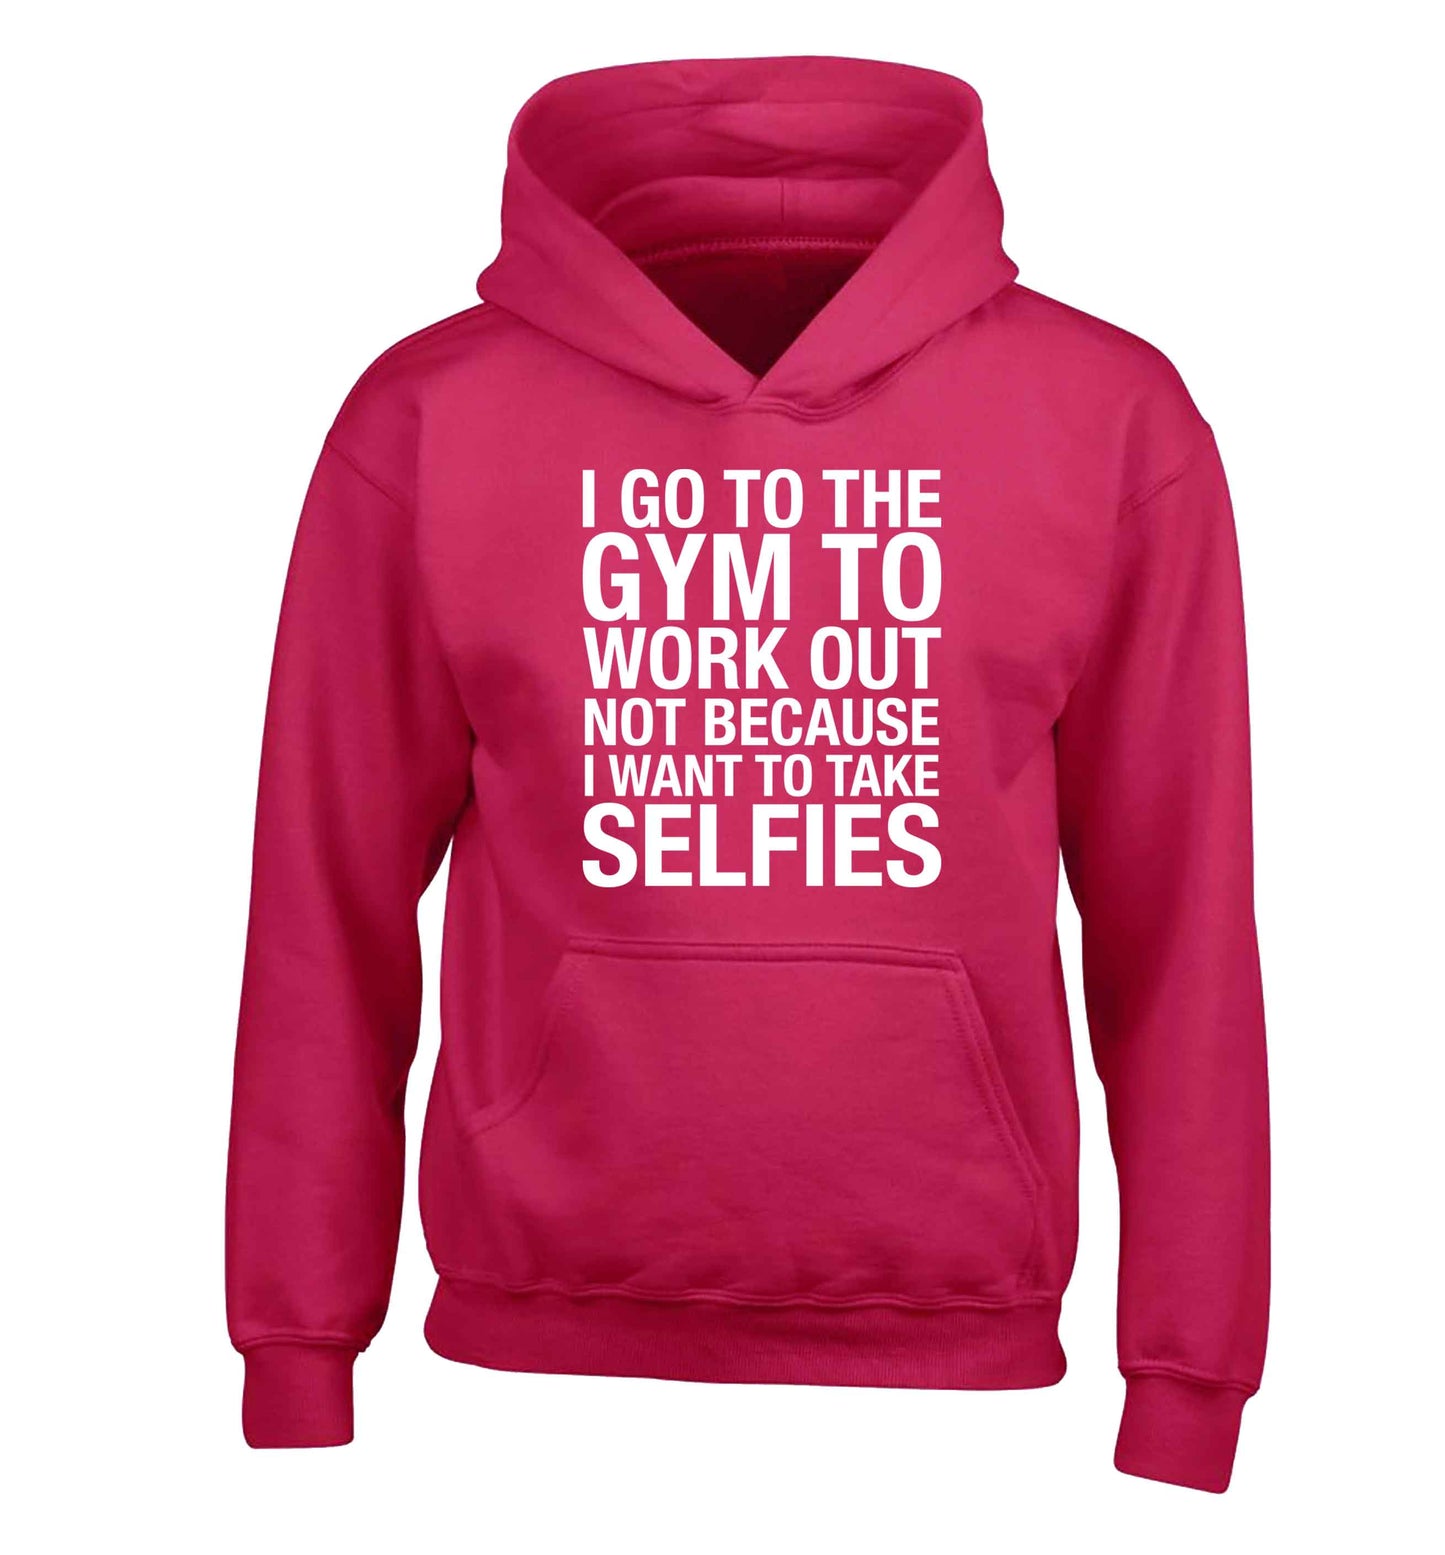 I go to the gym to workout not to take selfies children's pink hoodie 12-13 Years